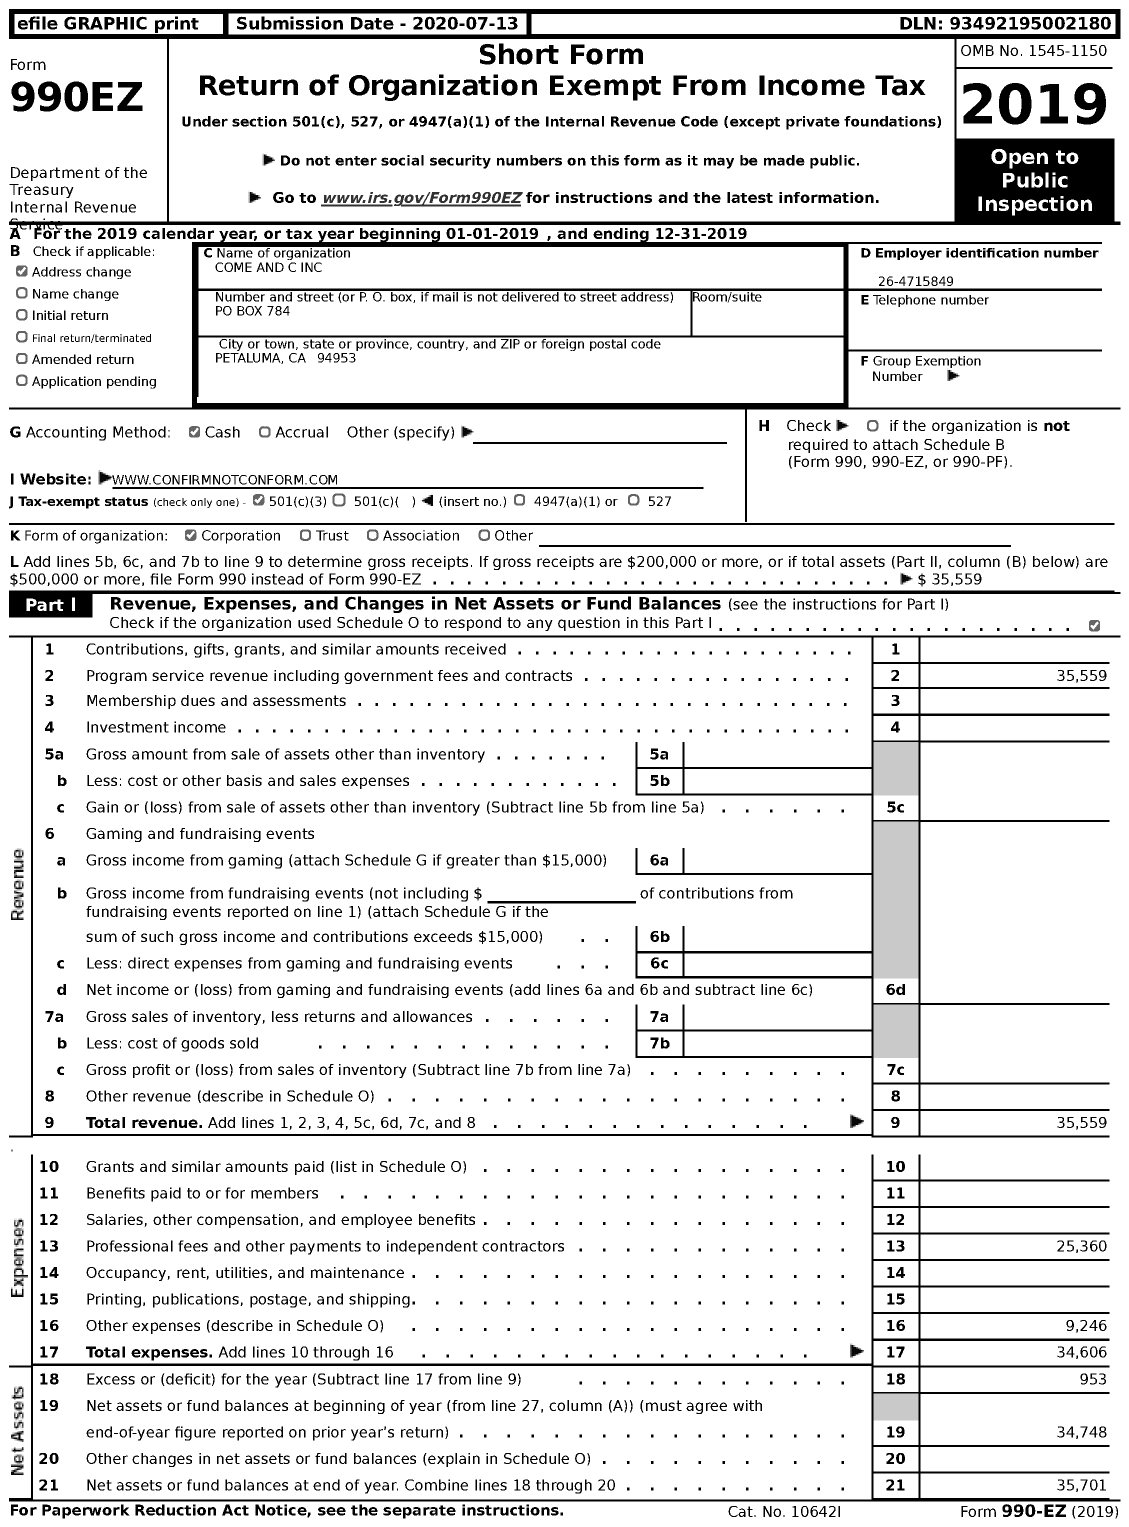 Image of first page of 2019 Form 990EZ for Come and C